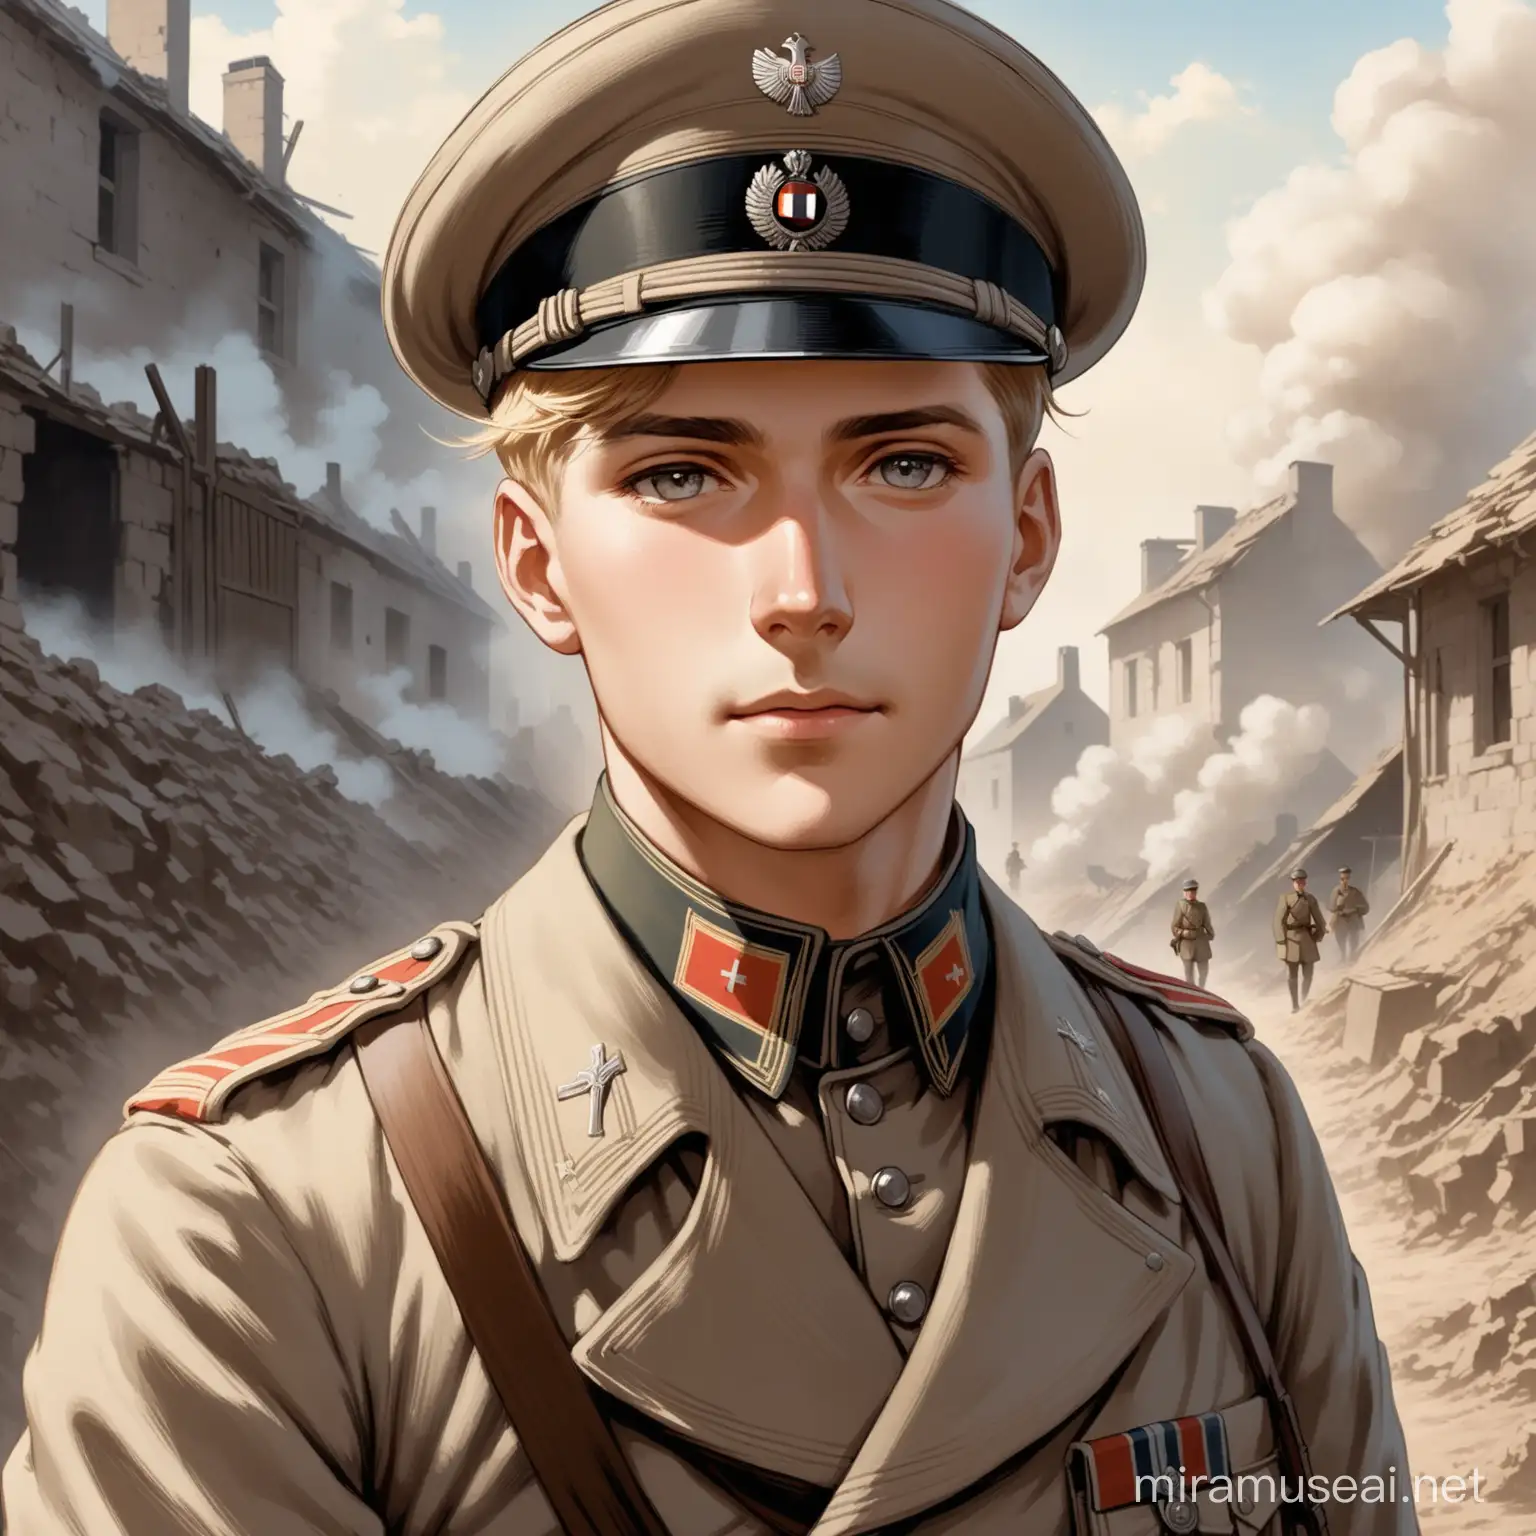 VERY DETAILED AND GOOD QUALITY, amazing, 4k, super cinematic style. A handsome Imperial German soldier in WW1 semi-realism art-style male in almost semi-anime-like, the early twenties, with typical 1910s grey colored uniform clothes of a lower rank soldier, gray eyes, short-cropped, sandy blond hair, kept neatly trimmed. At a bombed trench with smoke in the background.In spring 1910s France, half body view.